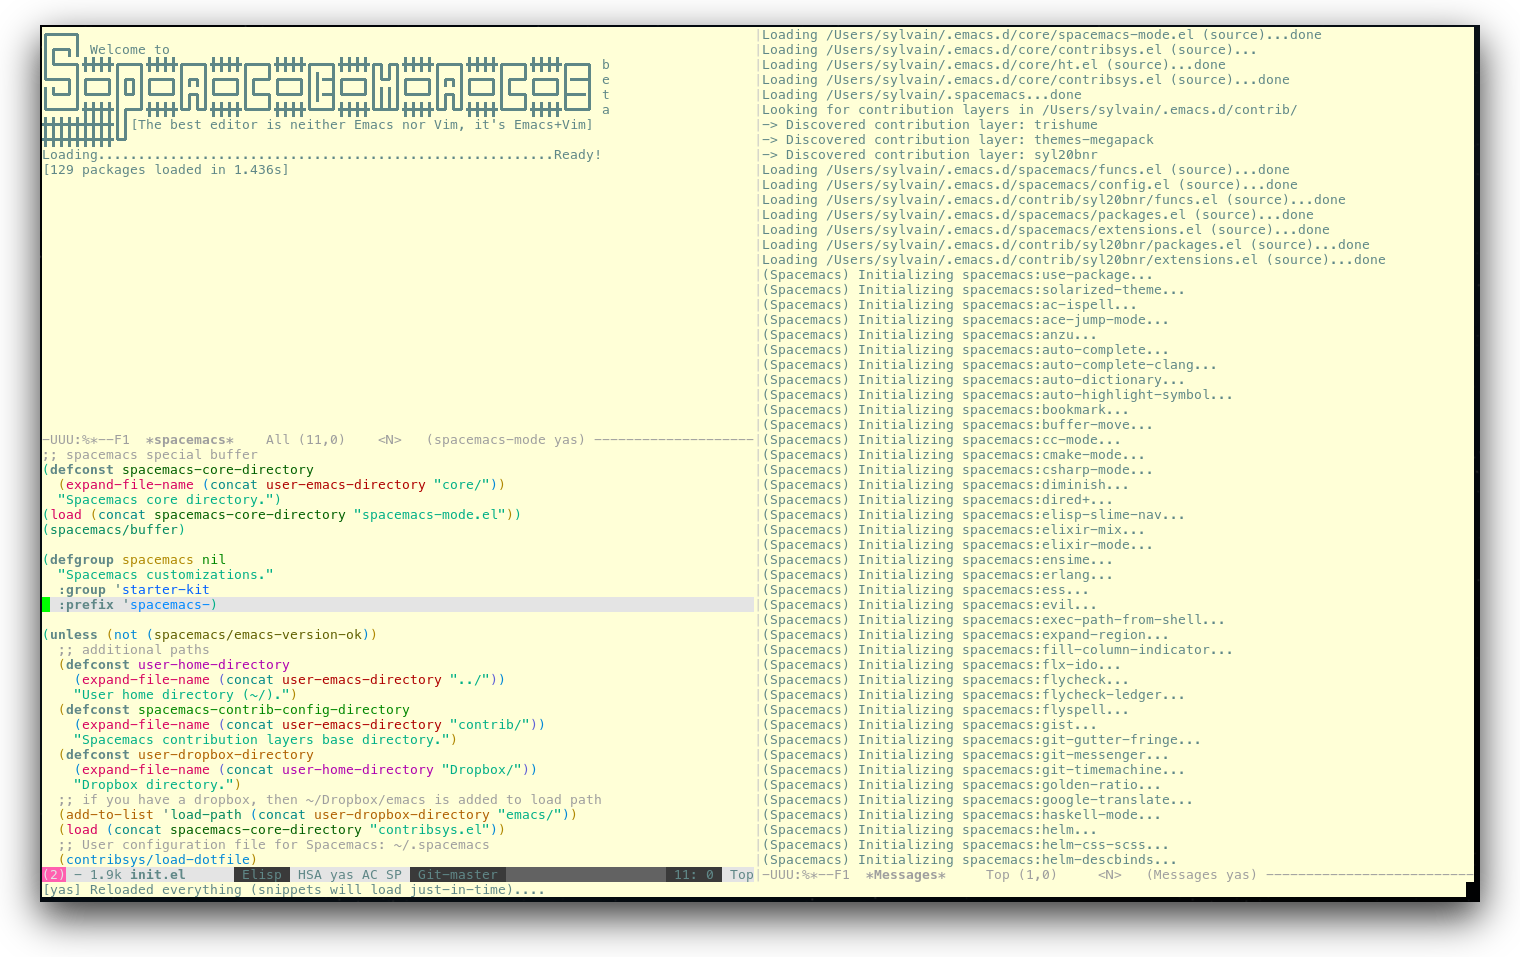 /TakeV/spacemacs/media/commit/3de3133ed0526f239714774834668cac1fba2629/doc/img/spacemacs-urxvt.png